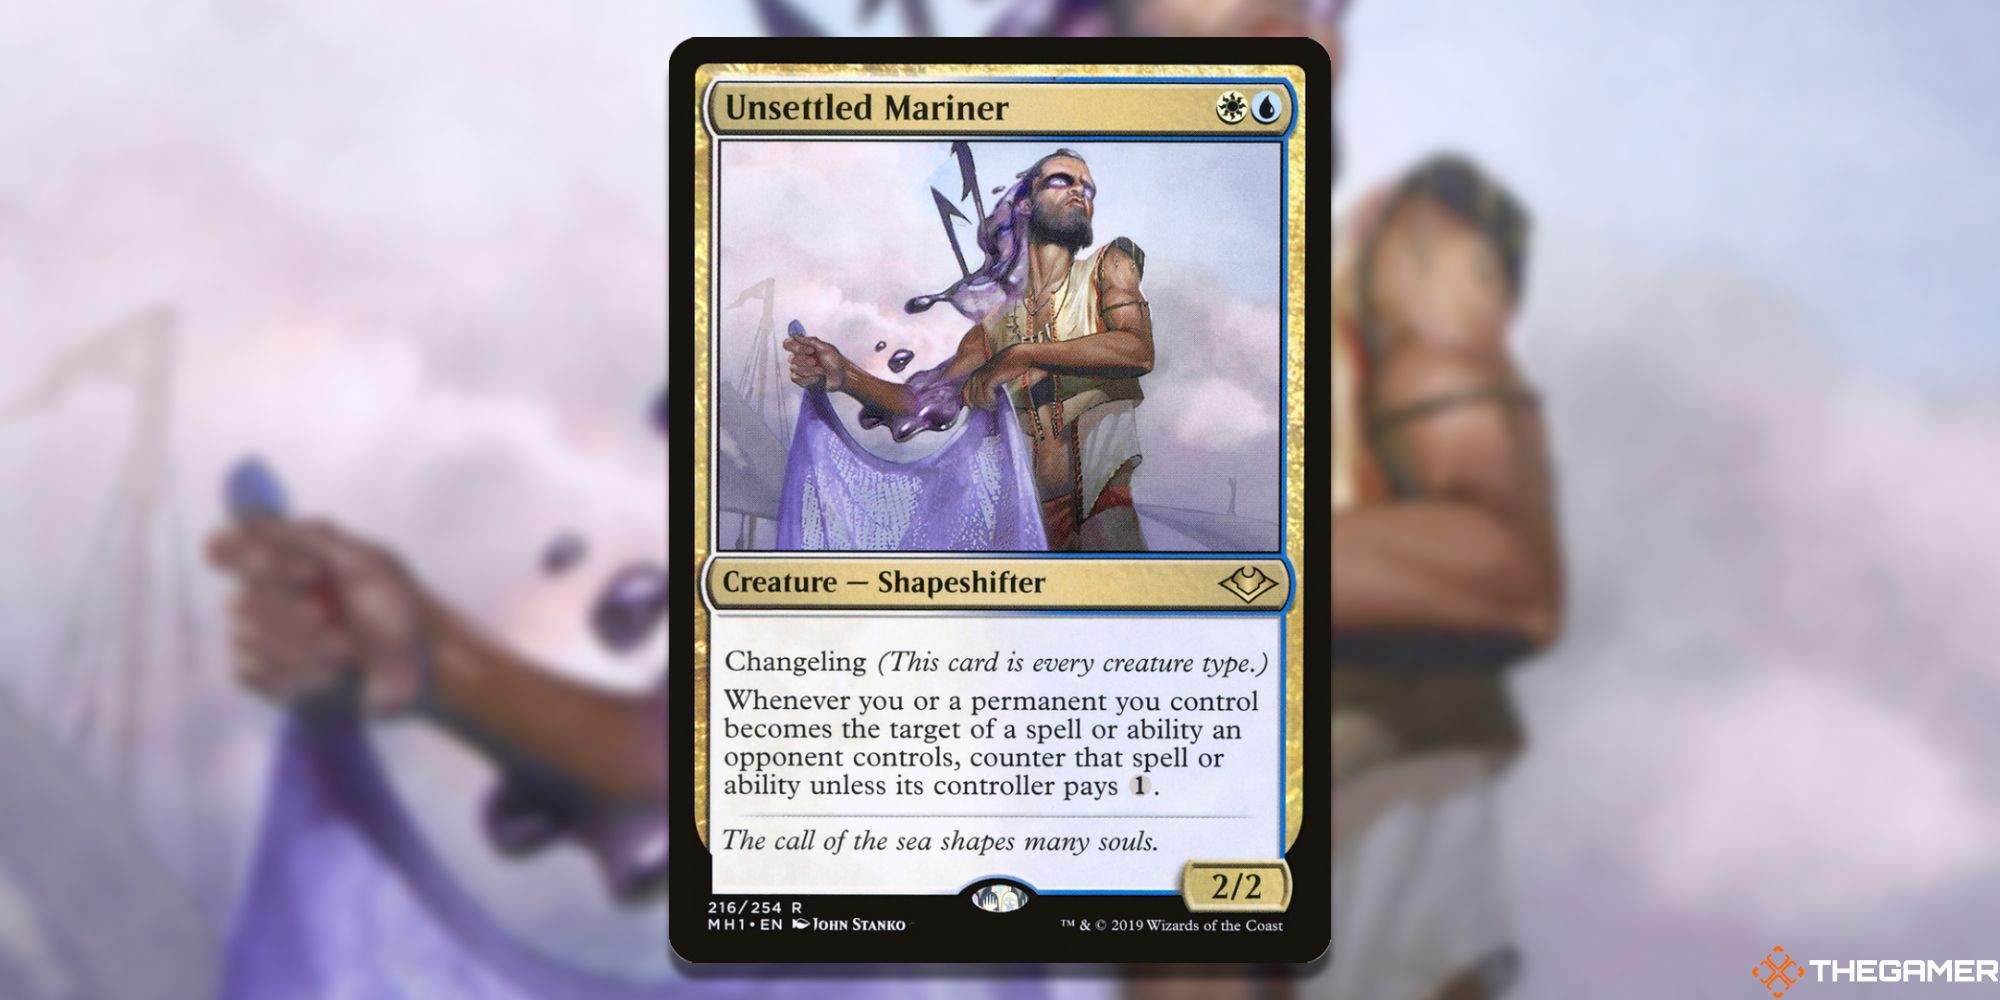 Image of the Unsettled Mariner card in Magic: The Gathering, with art by John Stanko